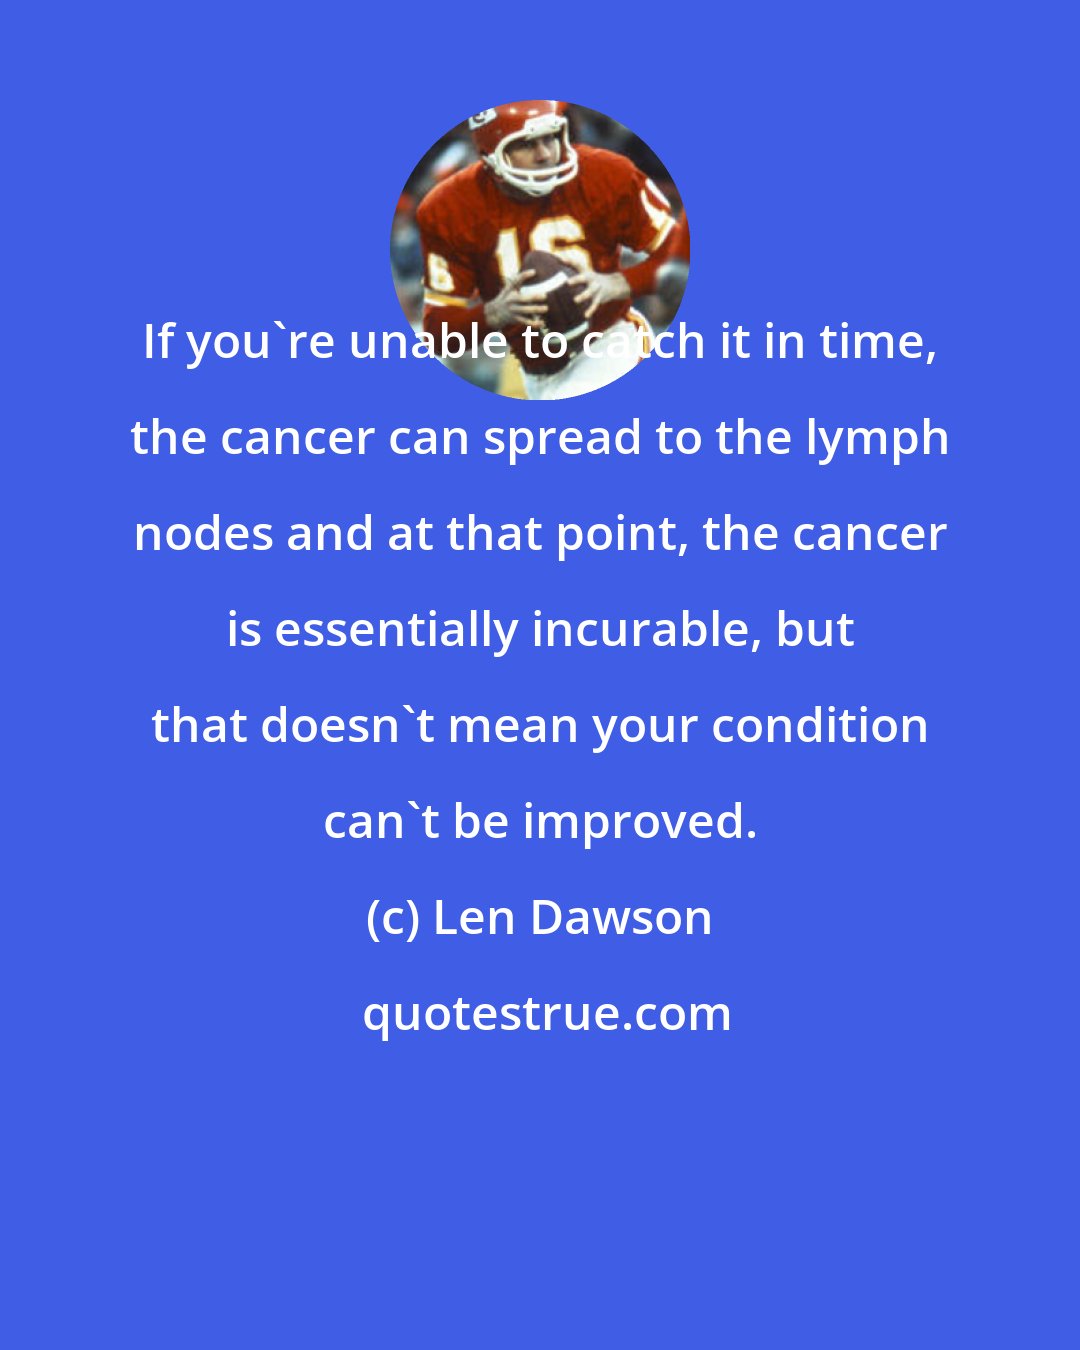 Len Dawson: If you're unable to catch it in time, the cancer can spread to the lymph nodes and at that point, the cancer is essentially incurable, but that doesn't mean your condition can't be improved.